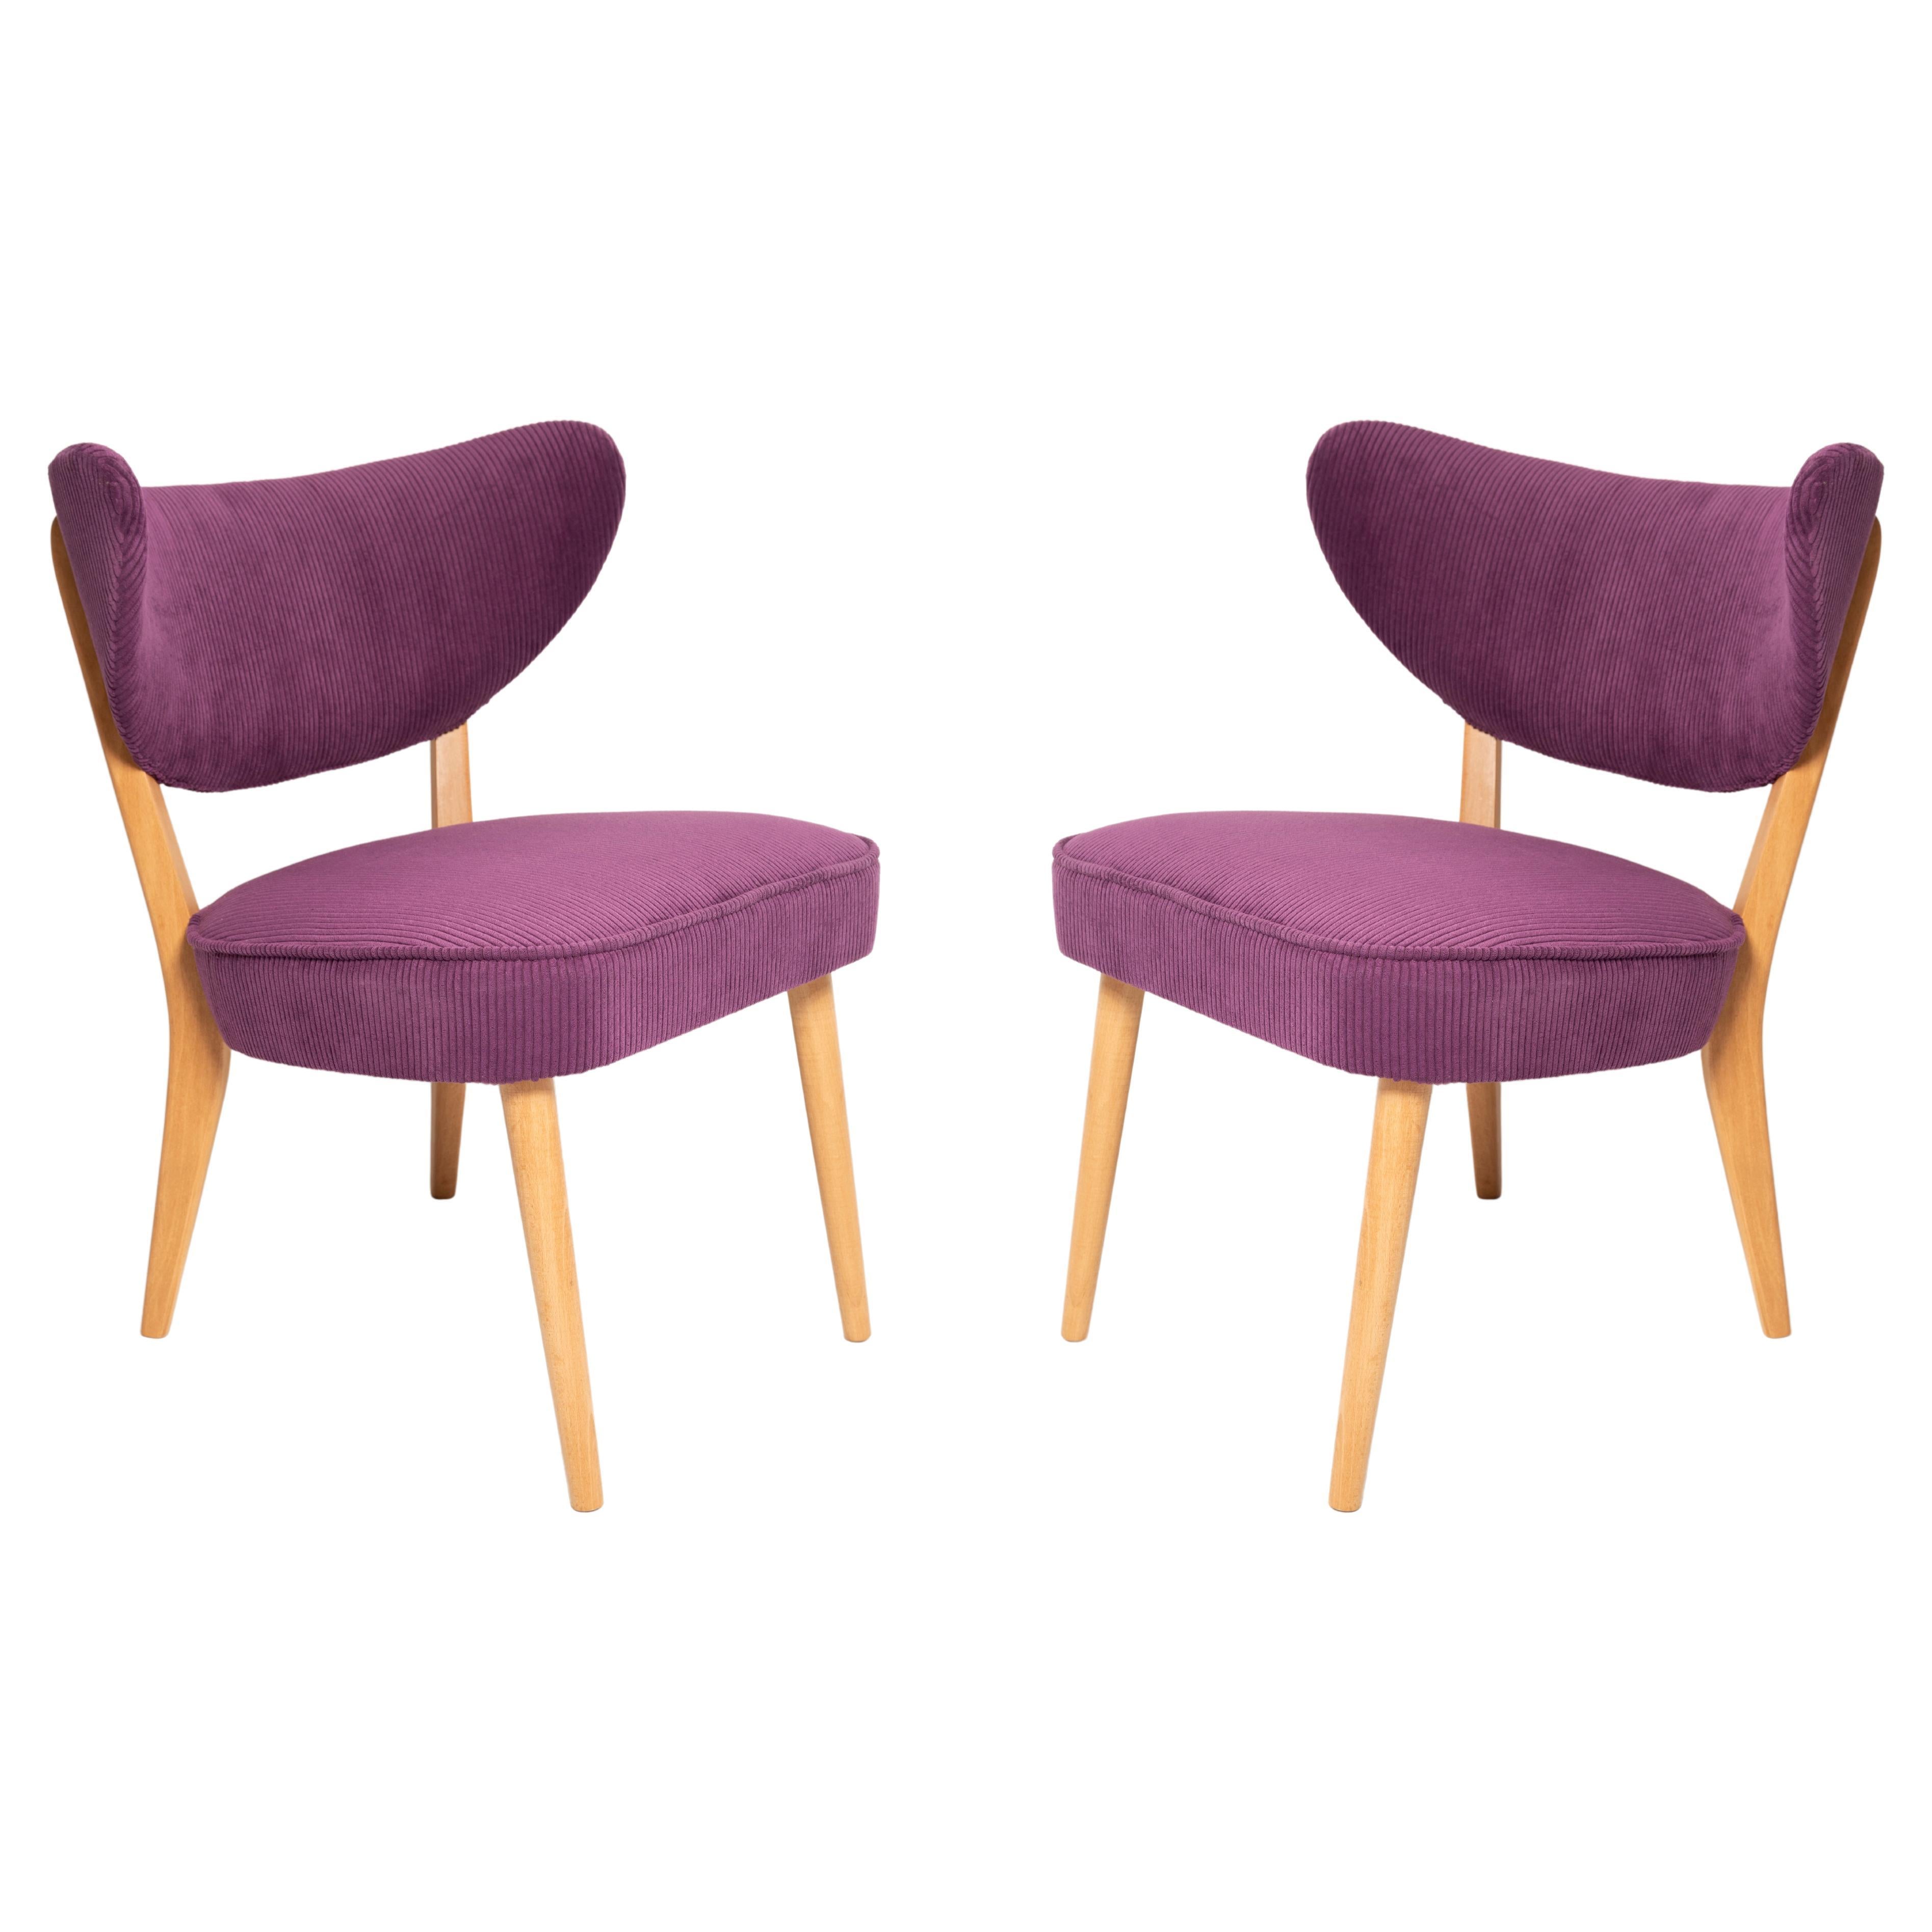 Pair of Midcentury Style Violet Velvet Club Chairs, by Vintola Studio, Europe For Sale